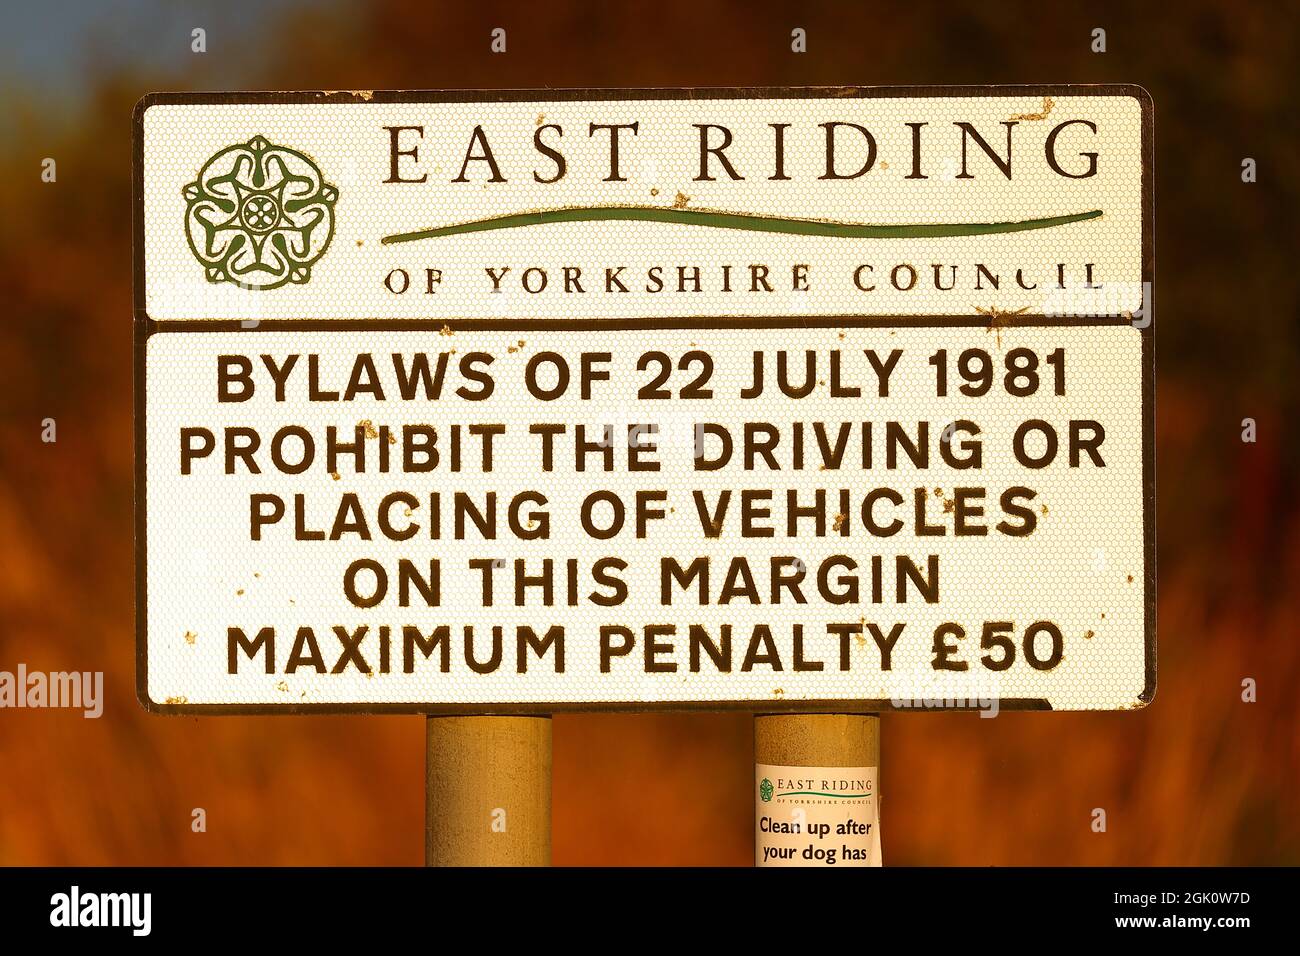 A sign in Flamborough regarding bylaws of 22nd July 1981 to warn drivers not to park on the nearby roadside verges. Stock Photo